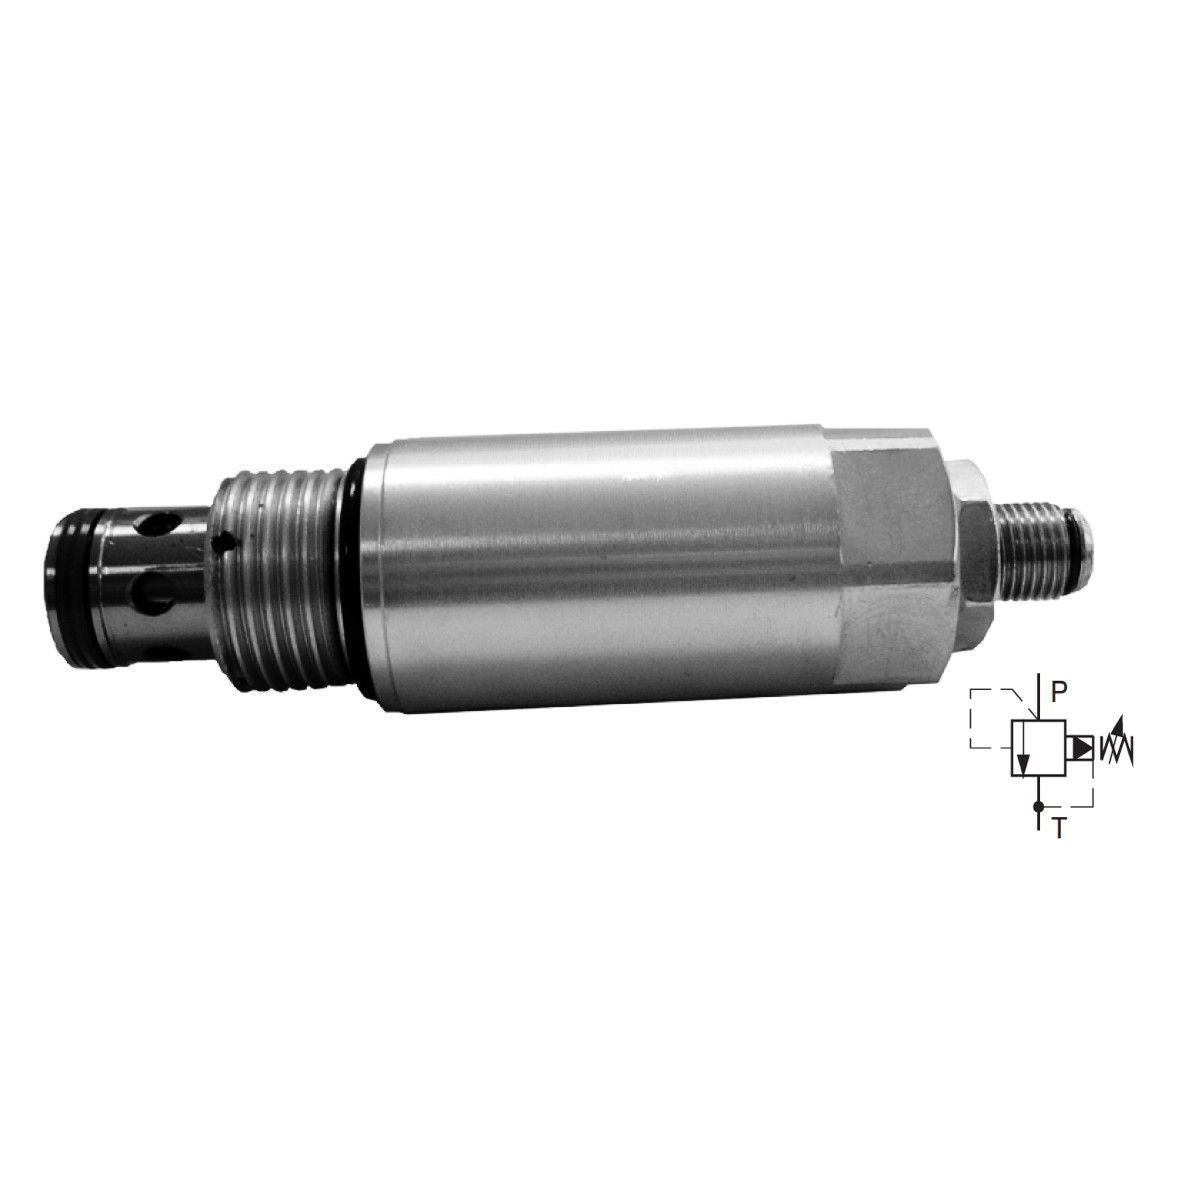 SR4A-B2/H16S-B : Argo Pressure Relief Valve, Spool Type, Pilot-Operated, 26 GPM, 5100psi, Allen Key Screw, Adjustable Up to 2320psi, C-10-2 Cavity